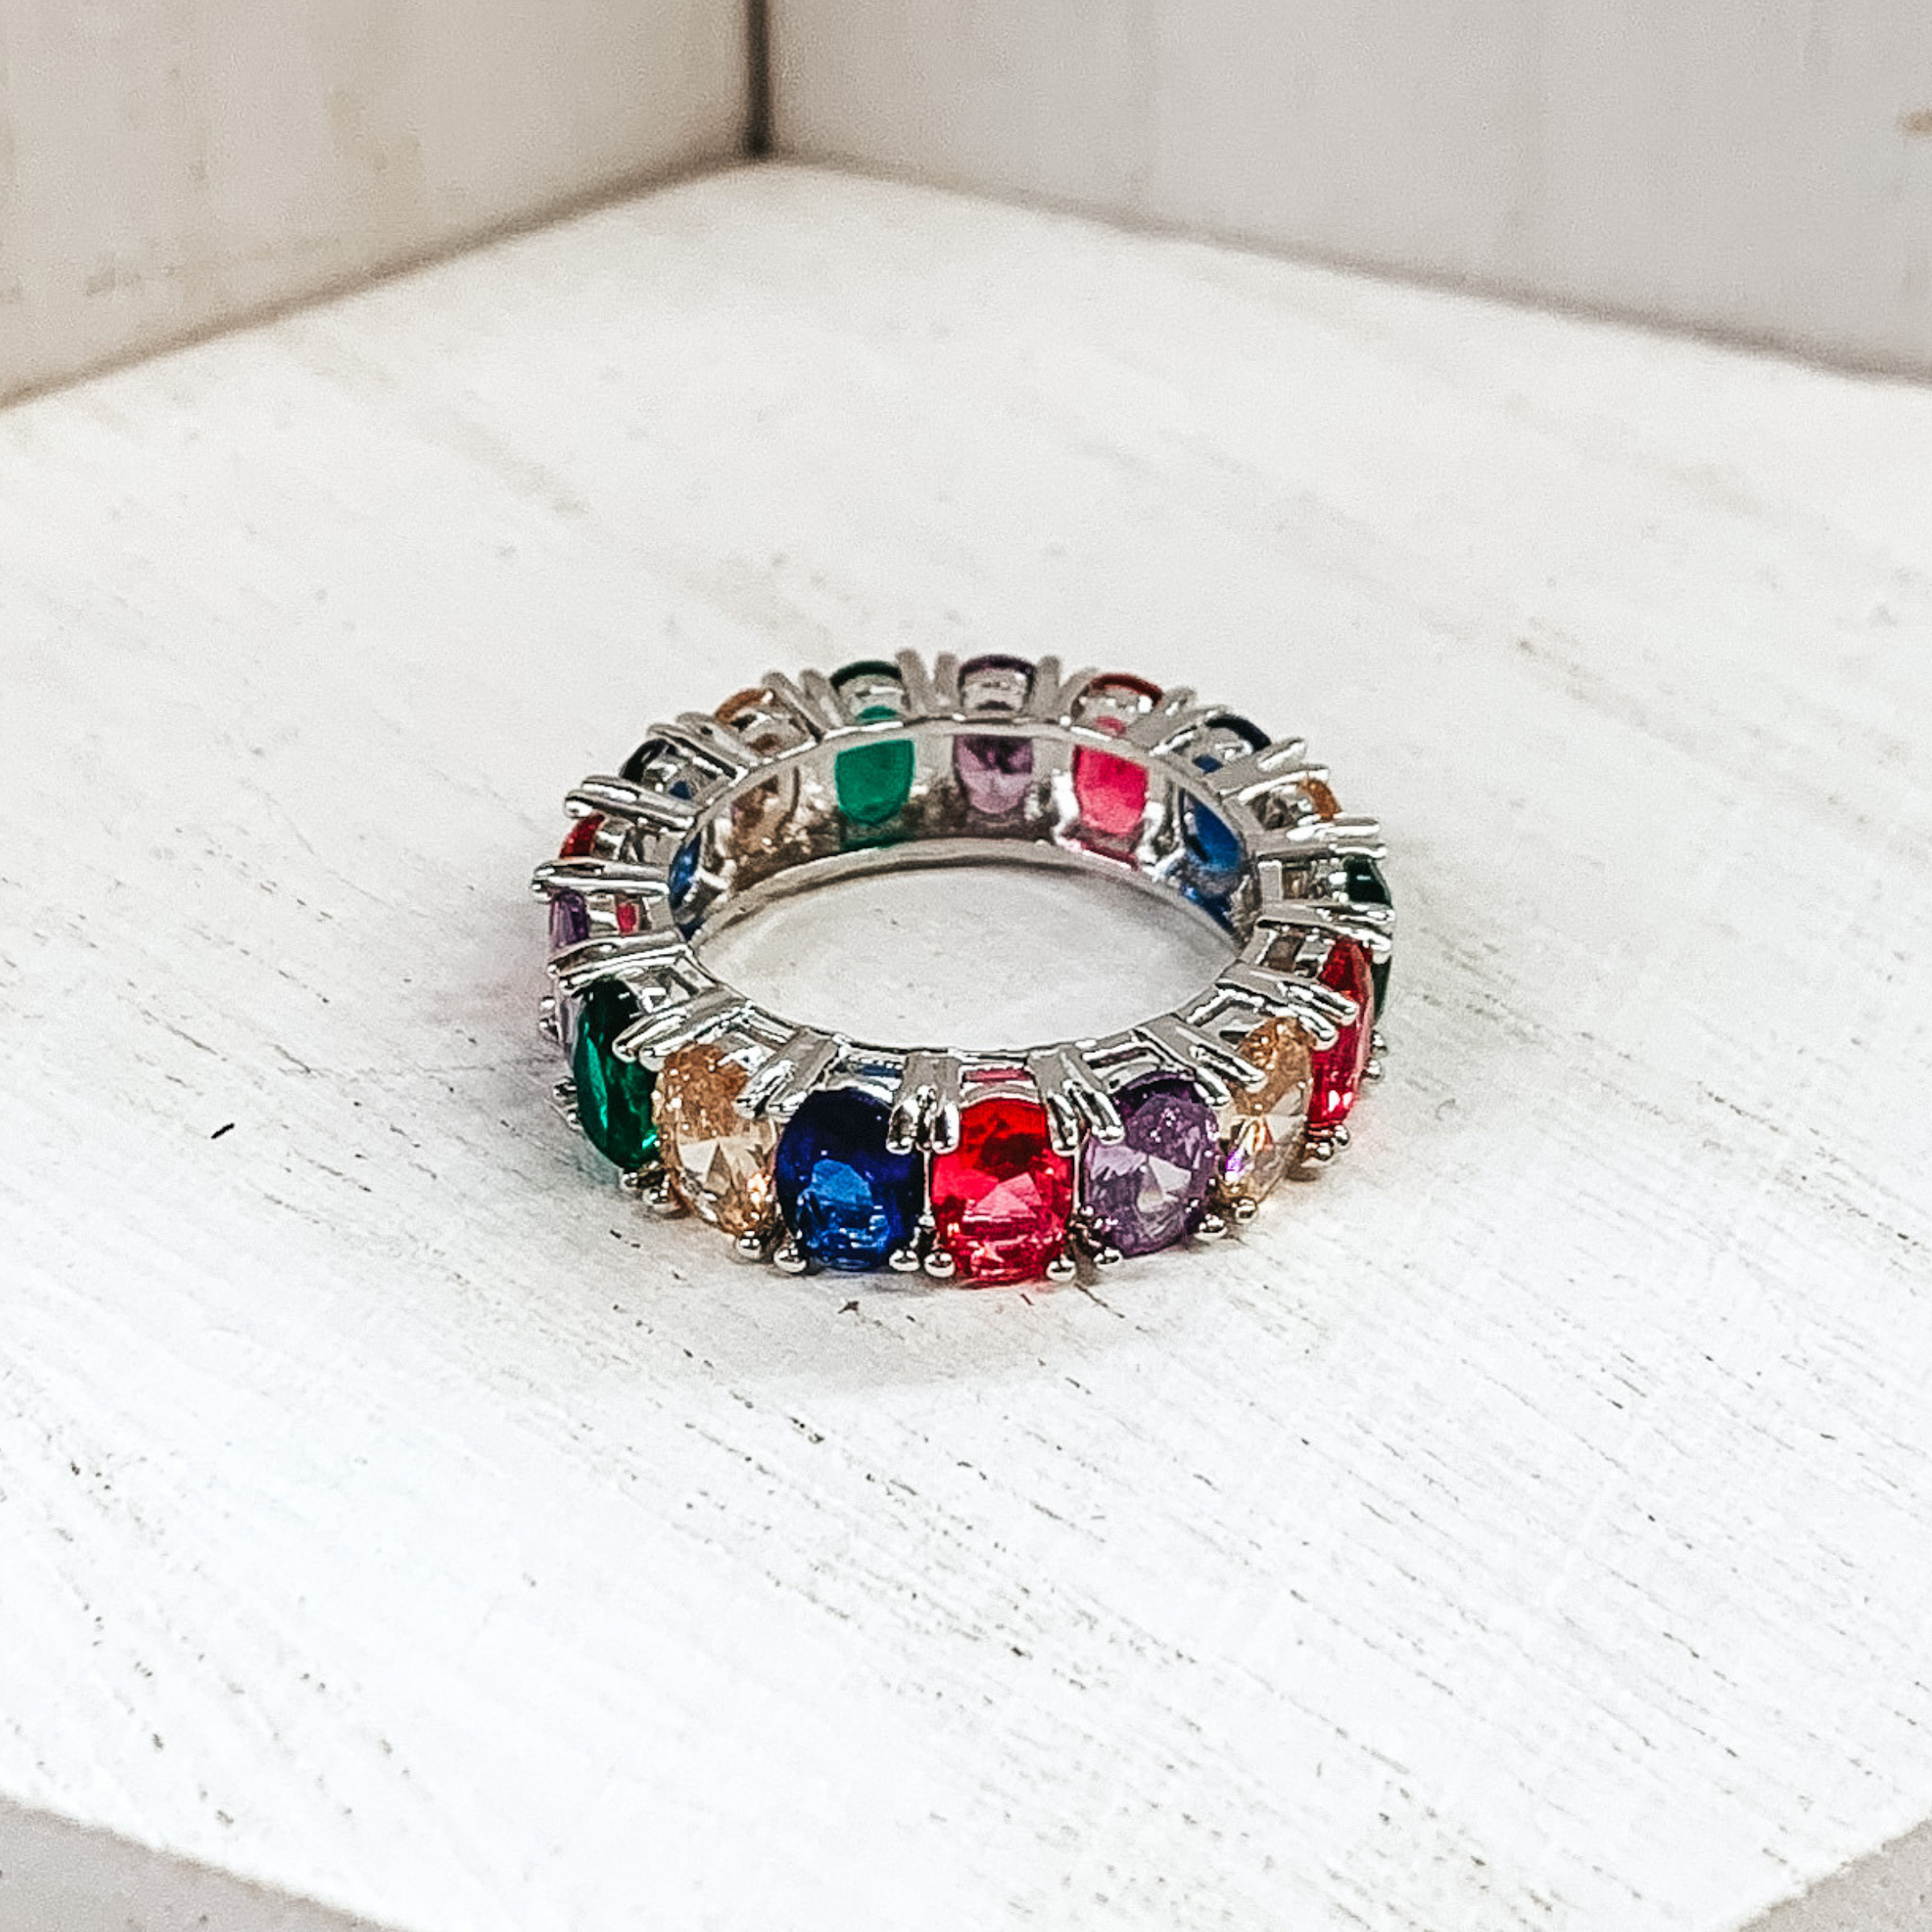 Silver ring with oval colored crystals around the entire ring. The crystals come in pink, blue, green, champagne, and purple shades. This ring is pictured on a white background.